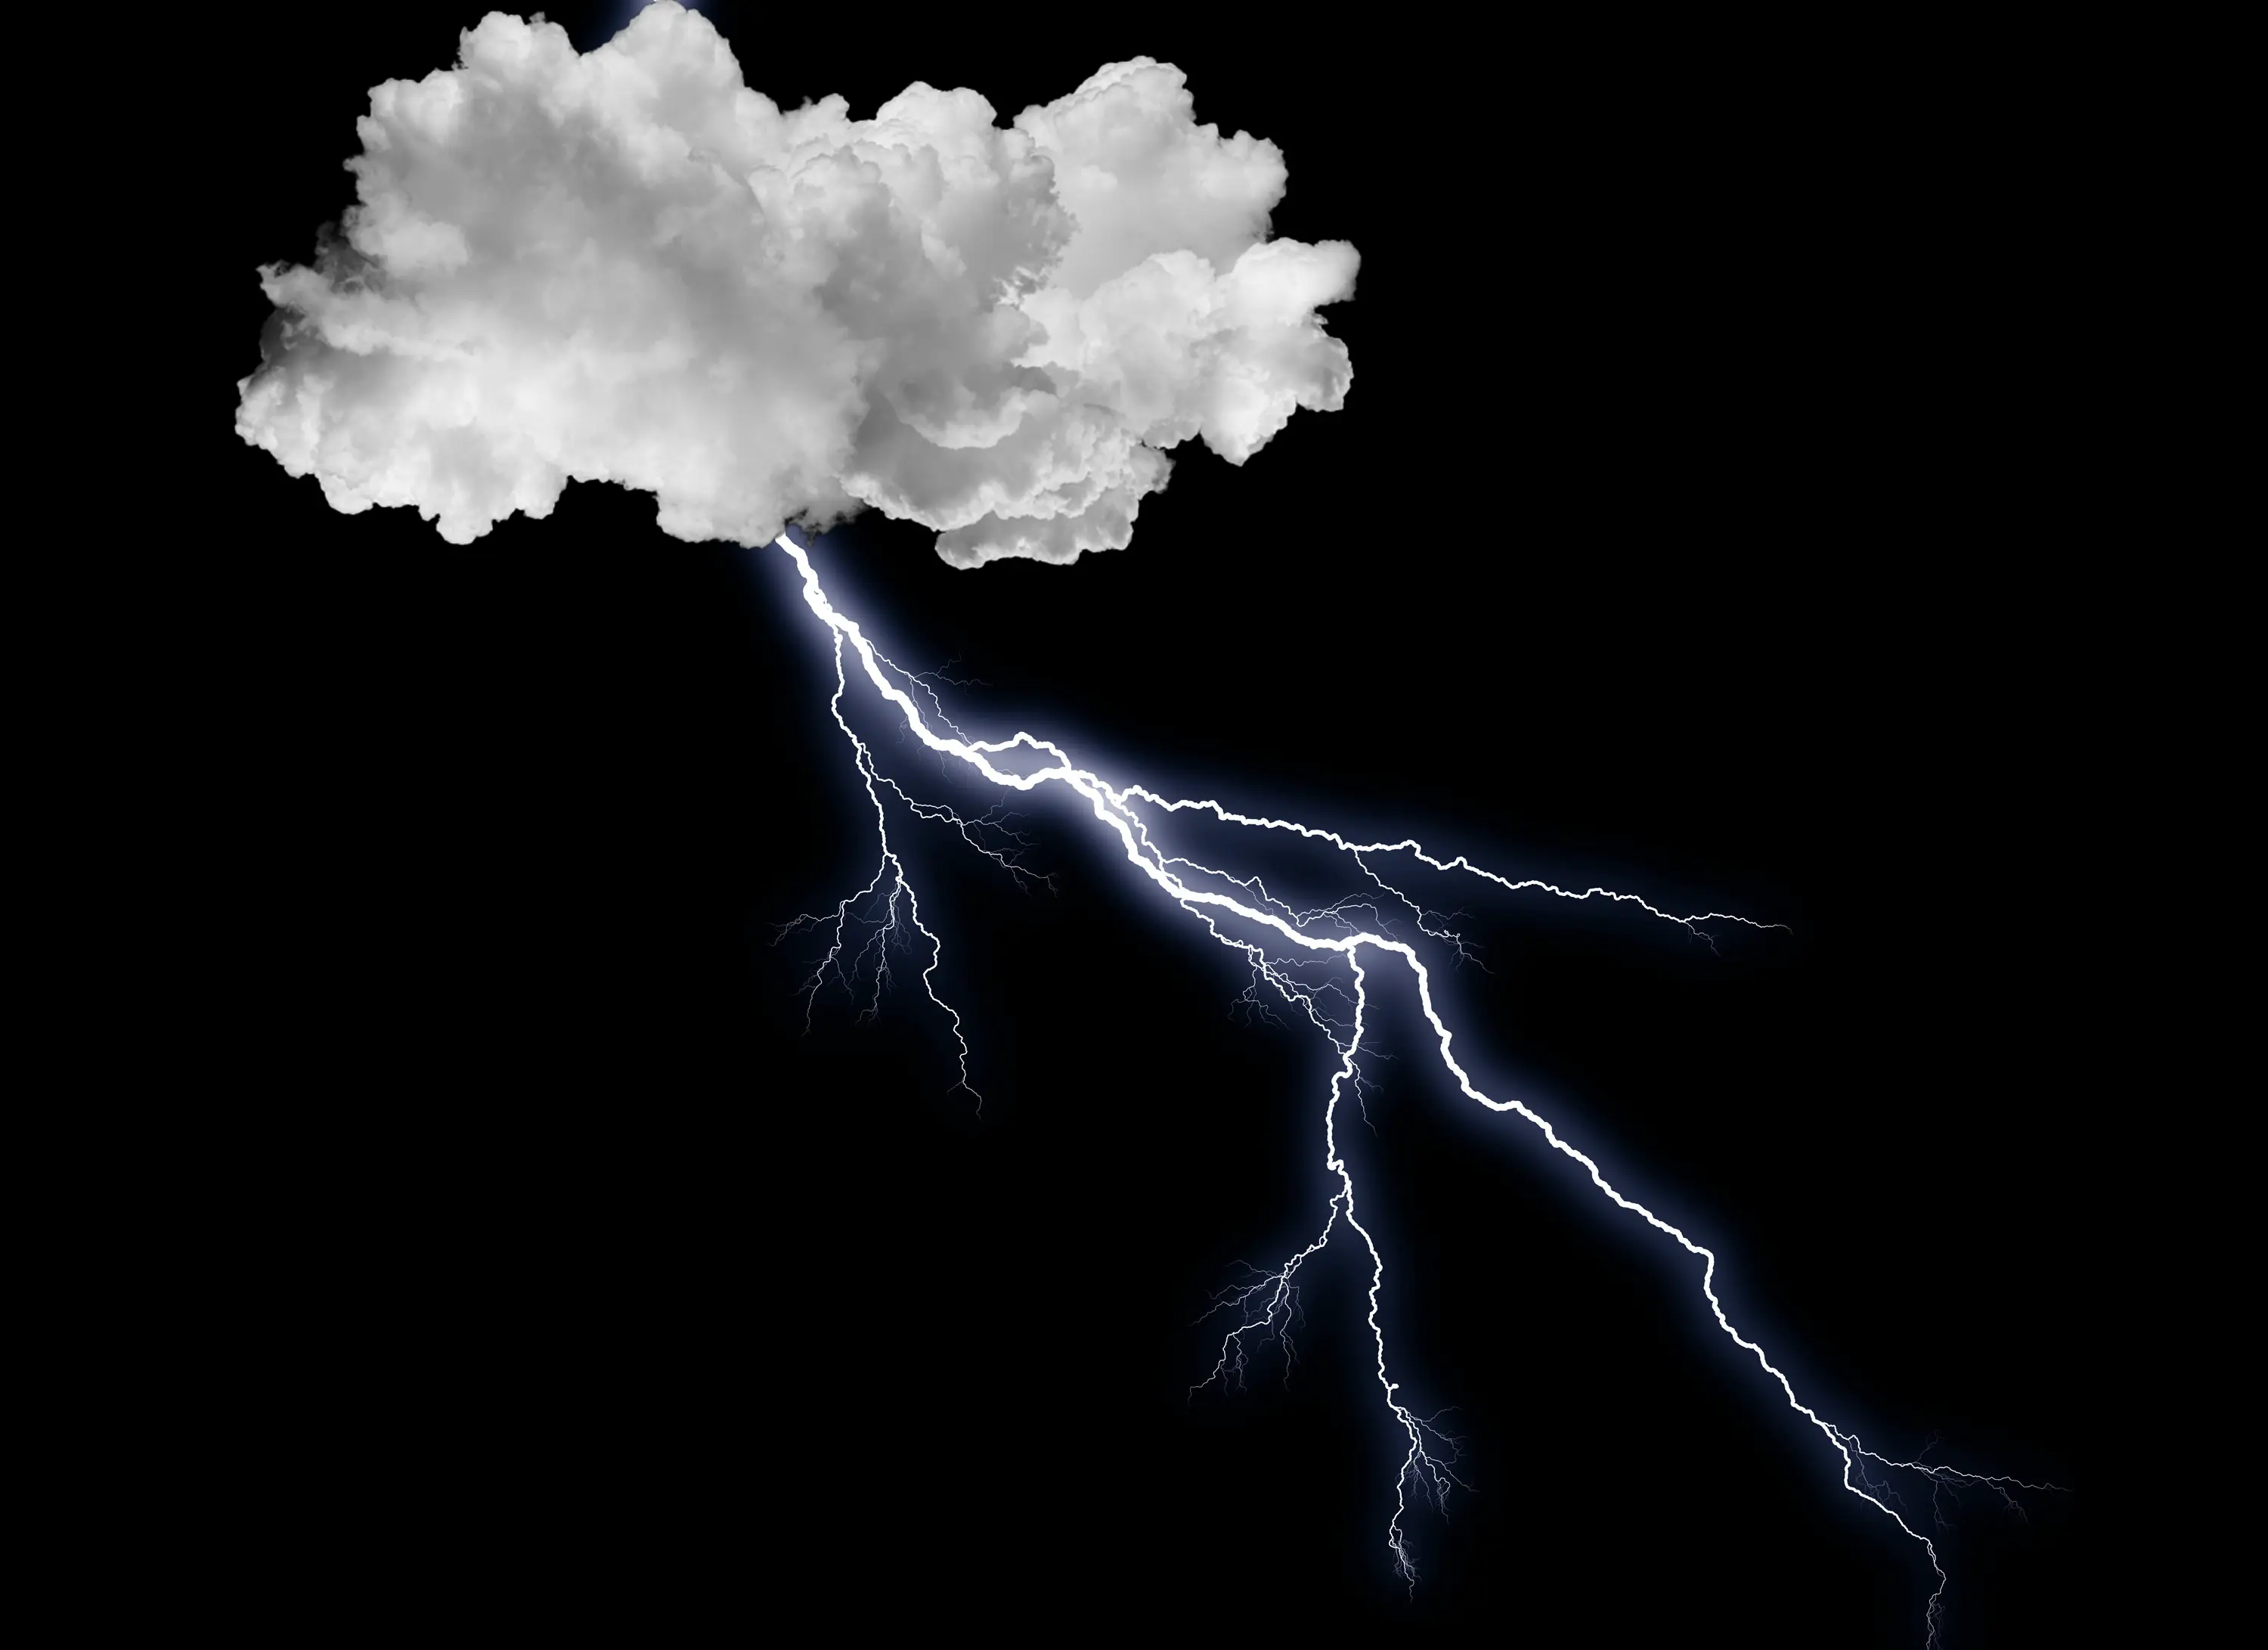 A cloud with a lightning bolt descending from it.